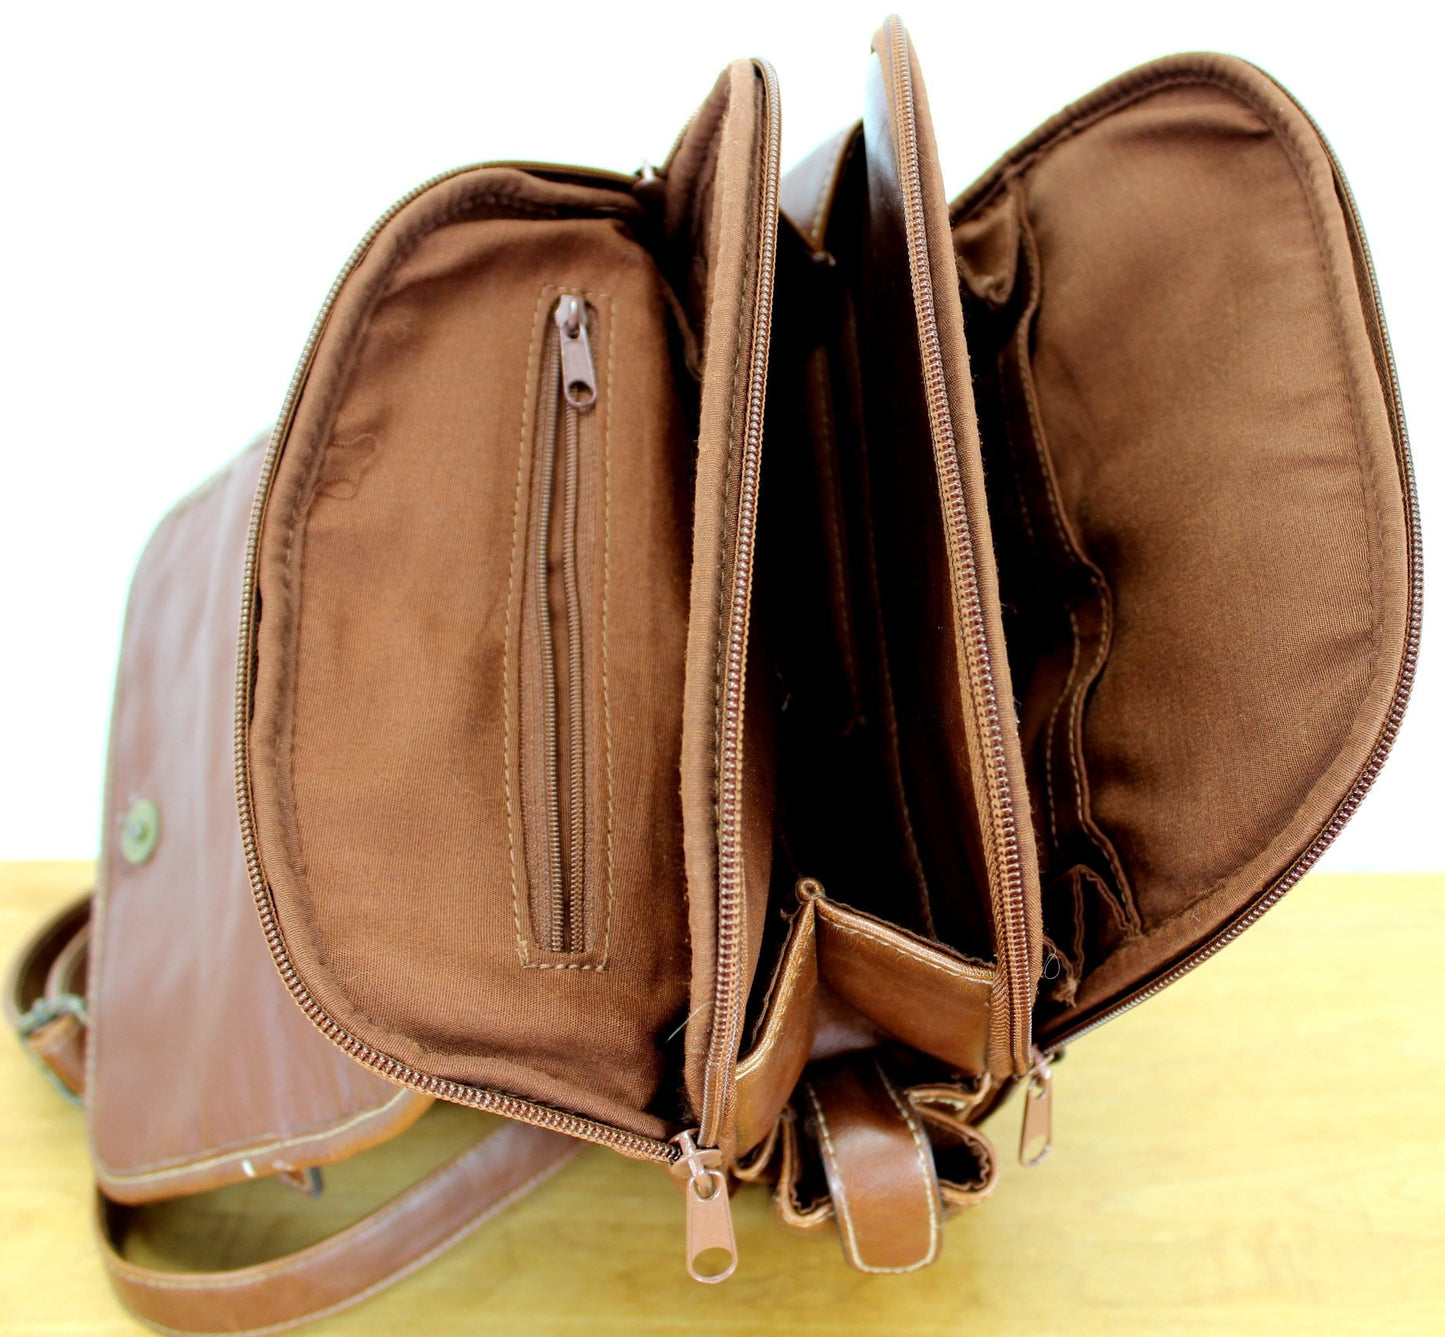 Rosetti Leather Backpack - Brown Double Strap - Compartments Galore clean interior